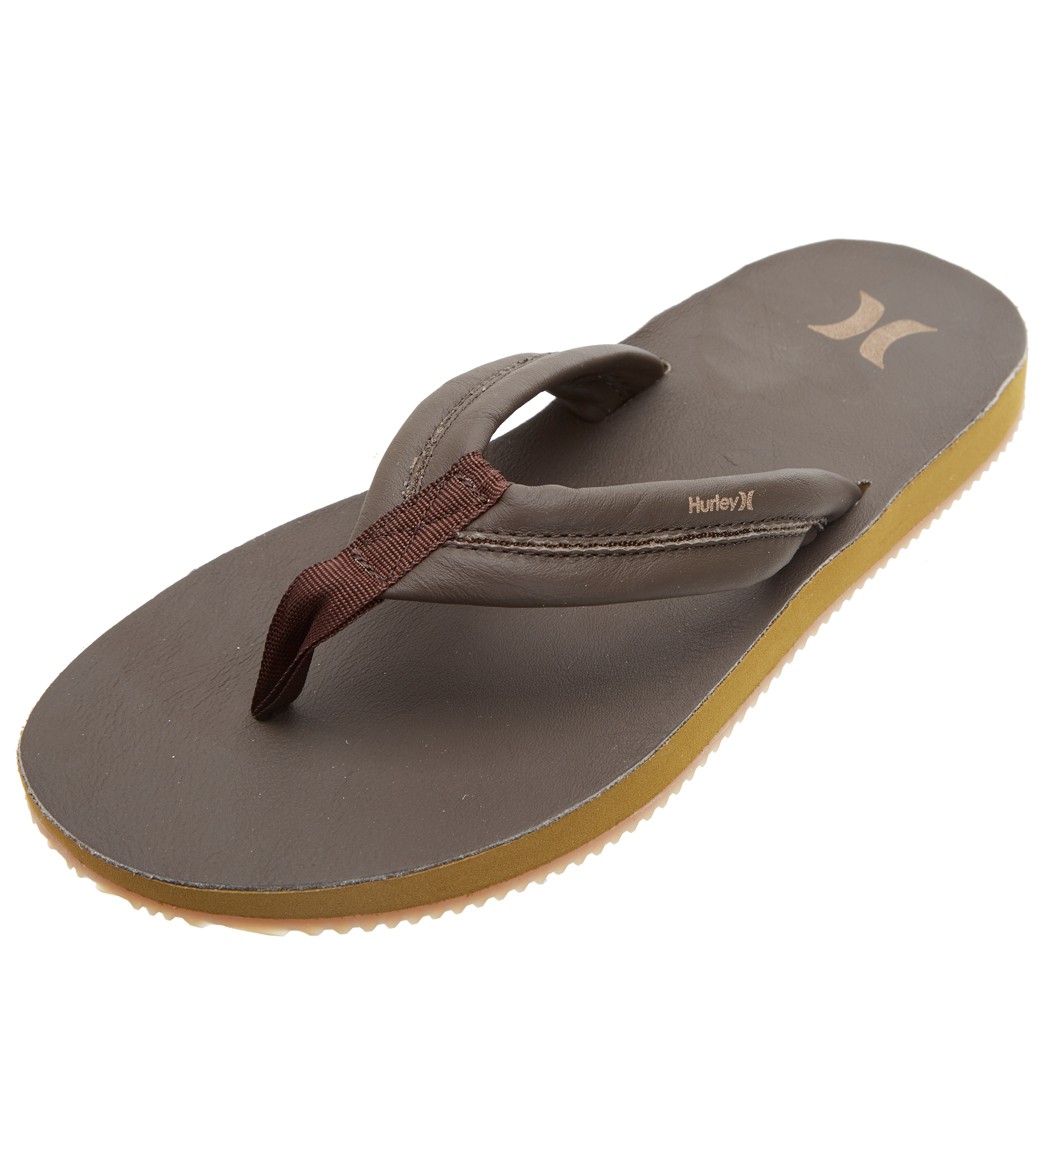 Hurley Men's Lunar Leather Flip Flop at SwimOutlet.com - Free Shipping